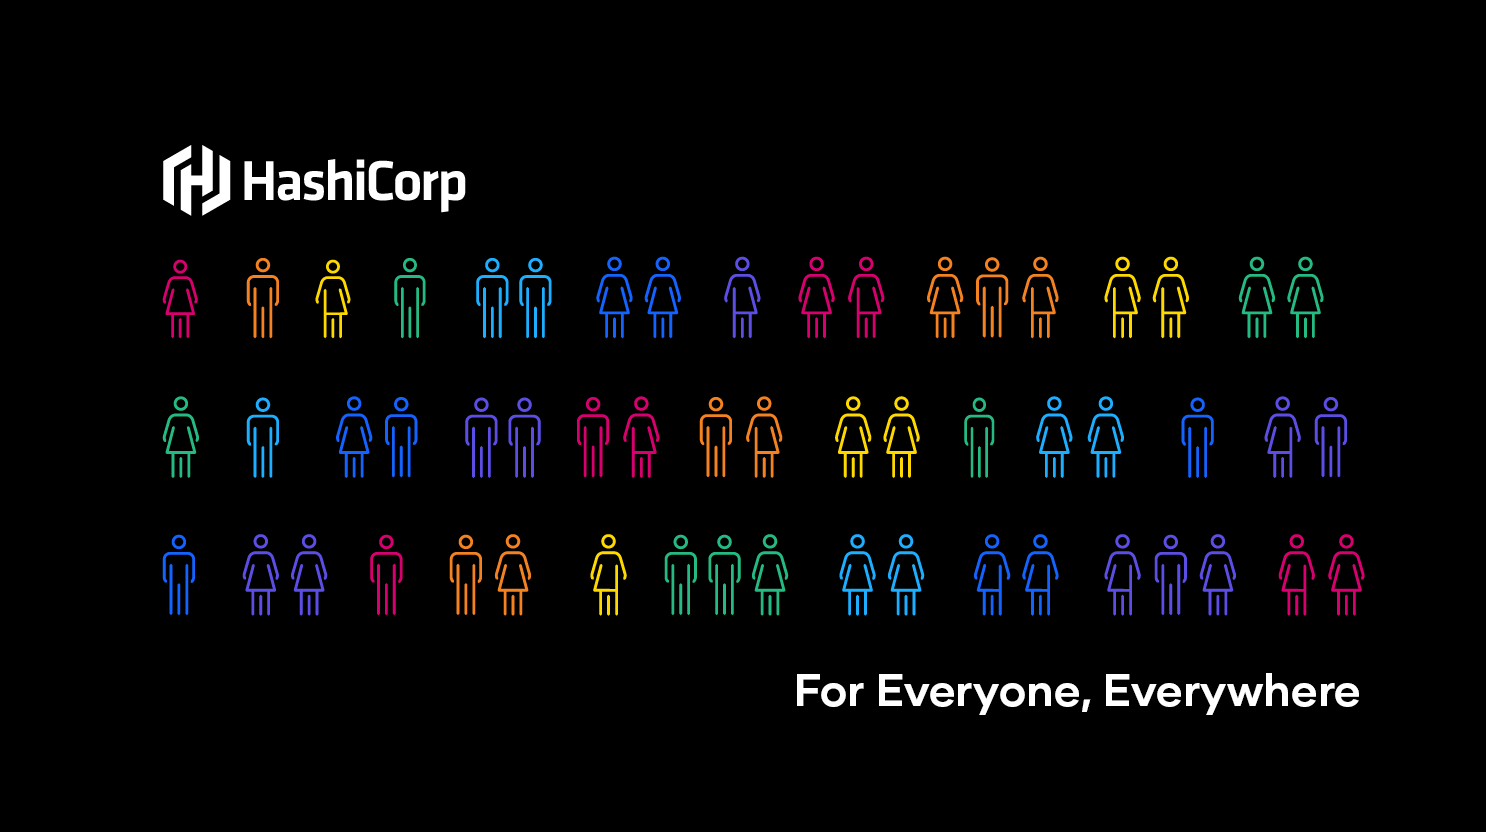 Celebrating Our HashiCorp User Group Community - 25,000 and Growing! 